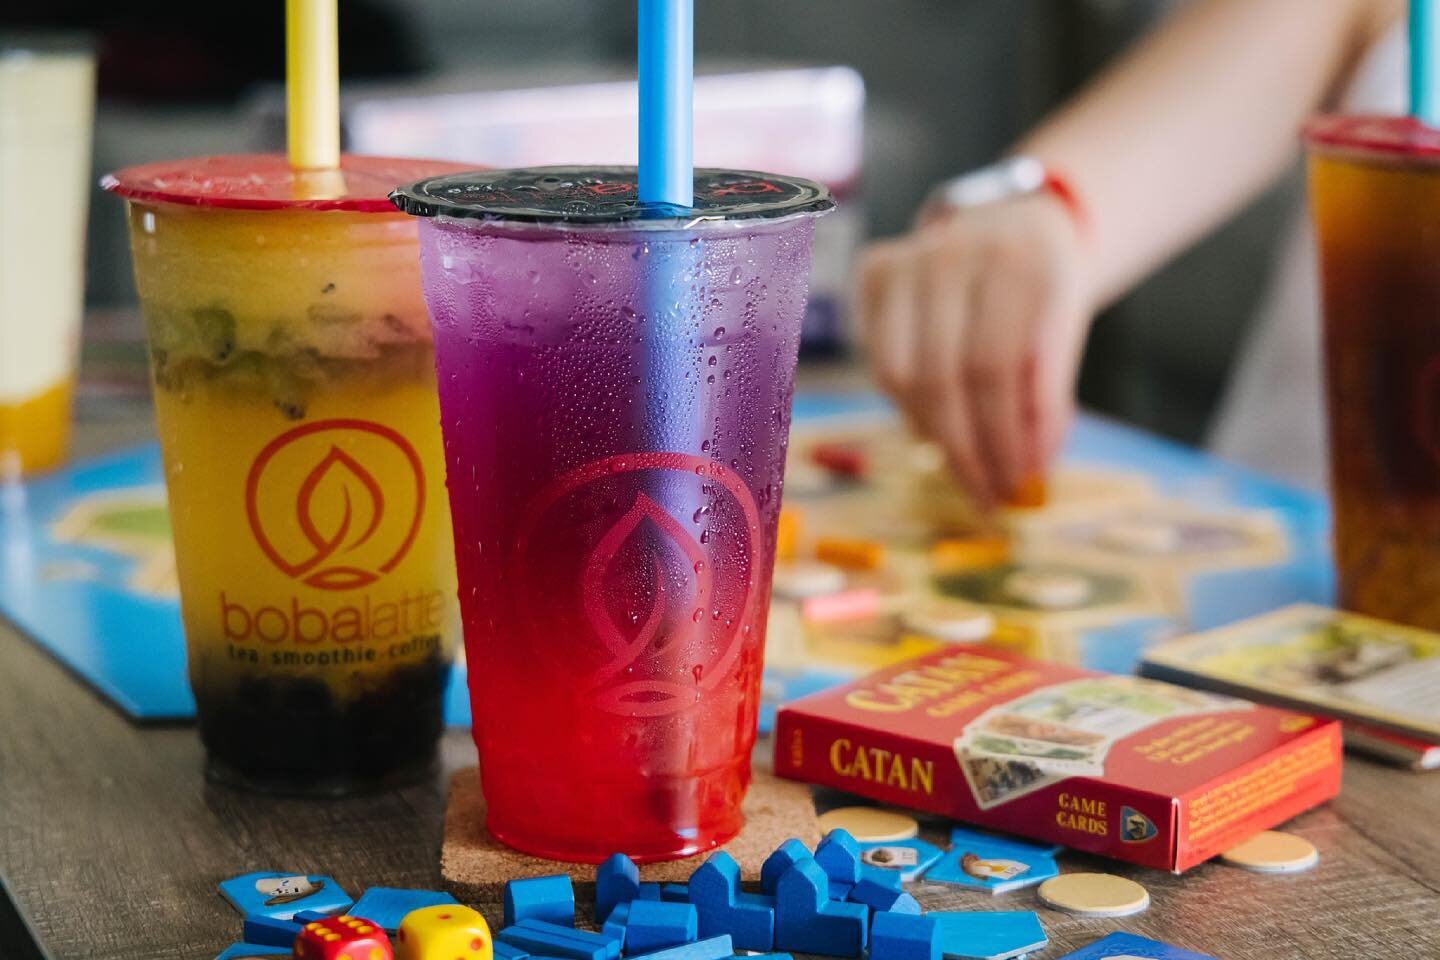 Looking for summer time plans? ☀️We have plenty of board games here available to play! Plus&hellip; there is a huge range of delicious drinks to choose from!

Dine in only available at the Frisco location! 

📍Frisco: 16100 TX-121 Building B, Suite 2